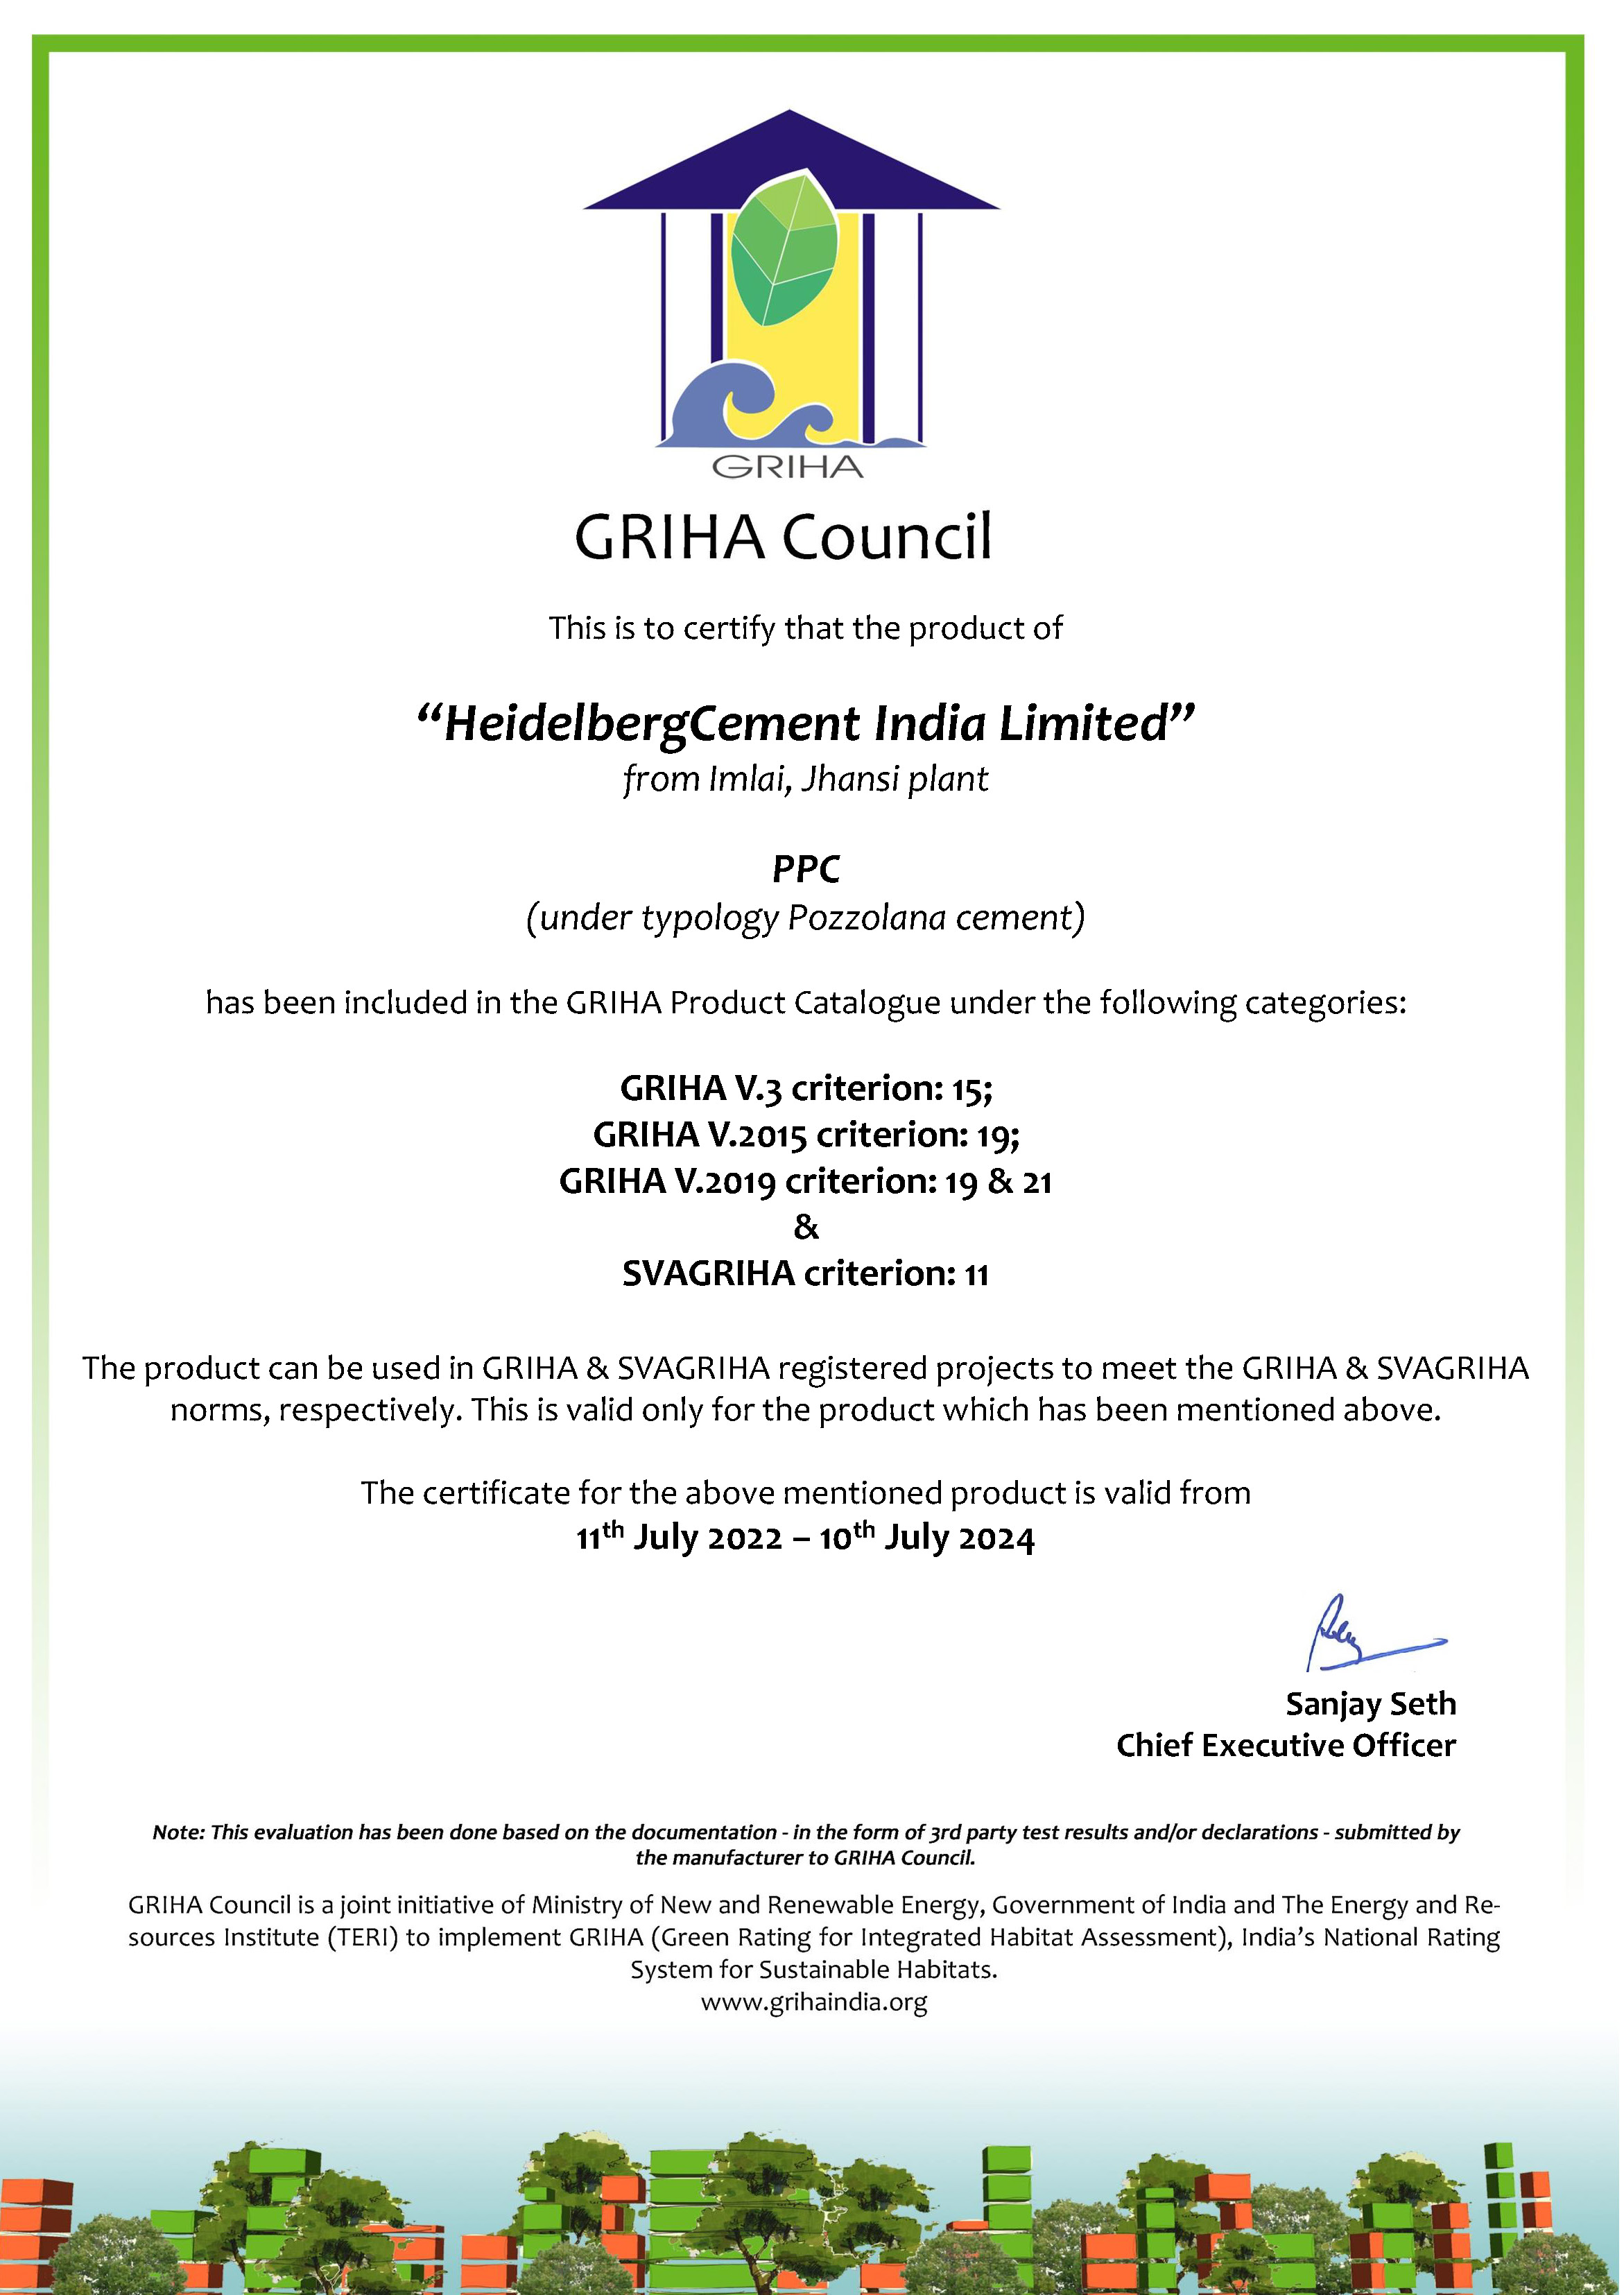 GRIHA Council certified HeidelbergCement PPC as Green Building Product